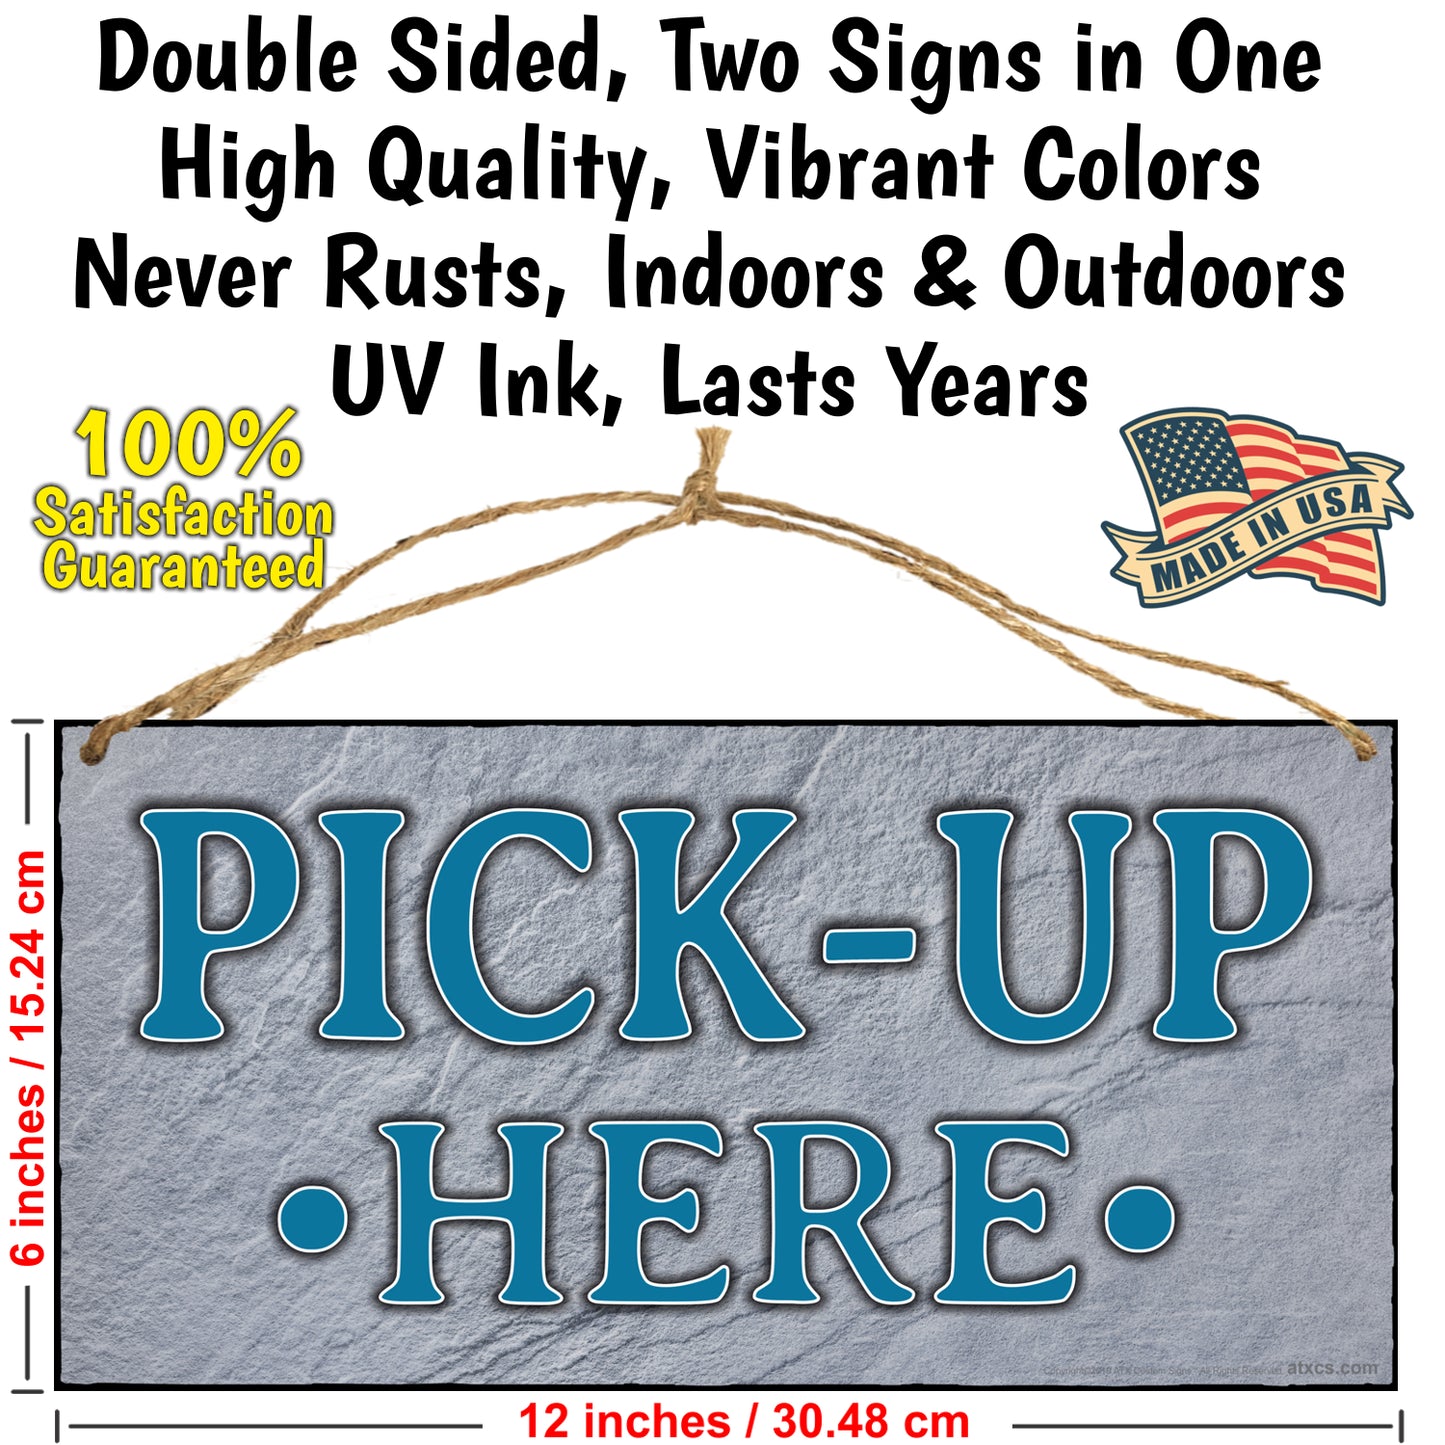 ATX CUSTOM SIGNS - Order Here and Pick Up Here Signs 2 pack Blue and Grey